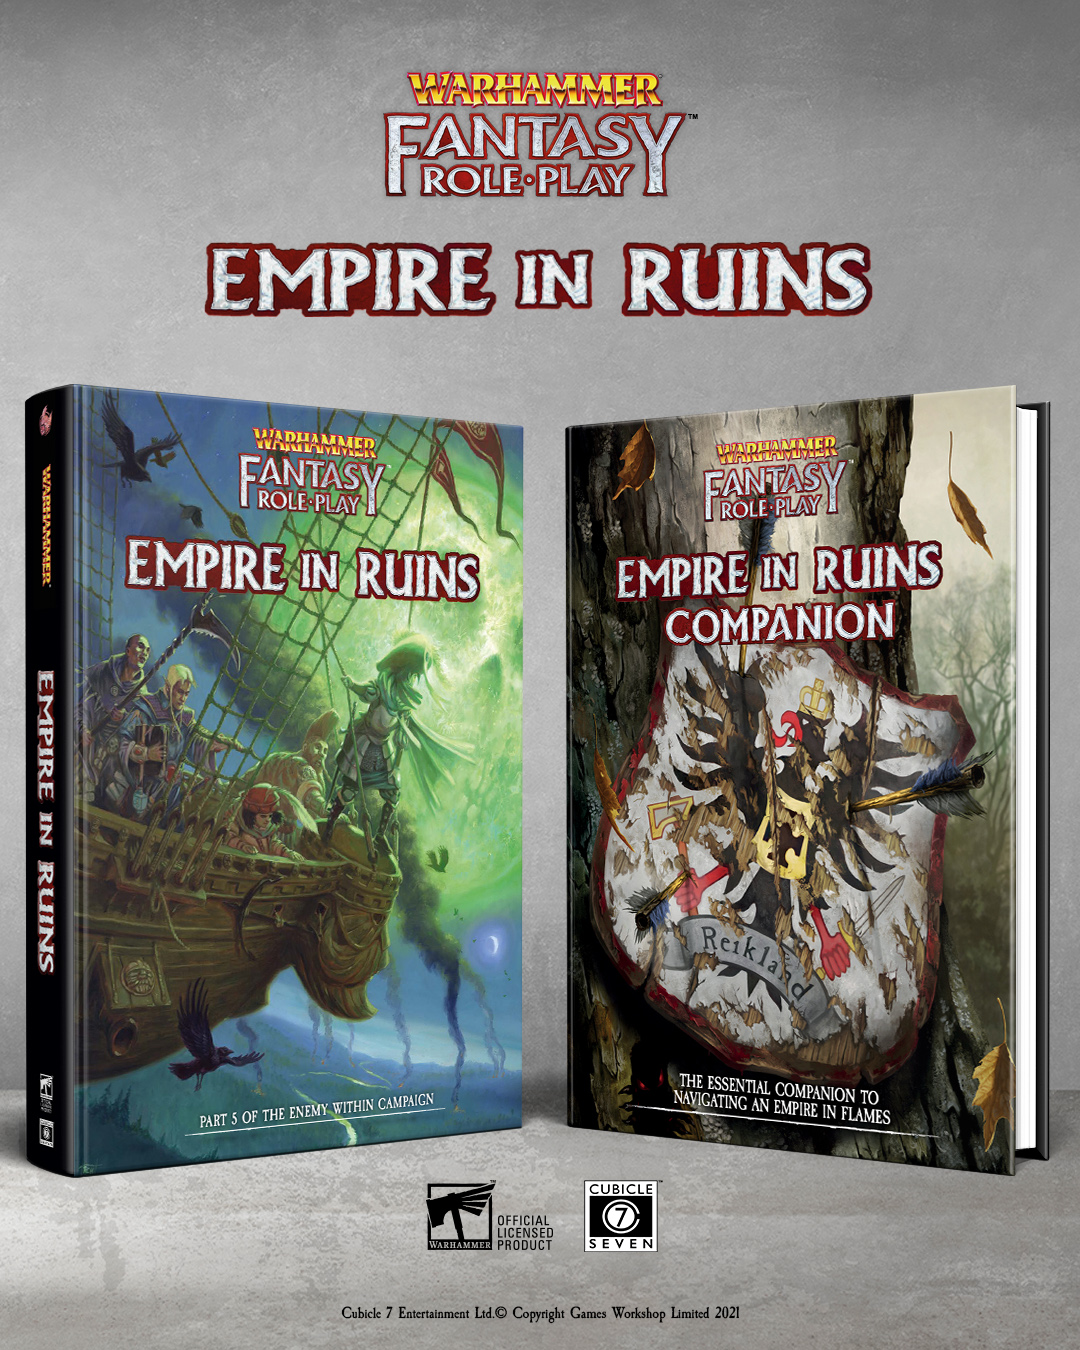 WFRP Empire in Ruins Companion Out Now!